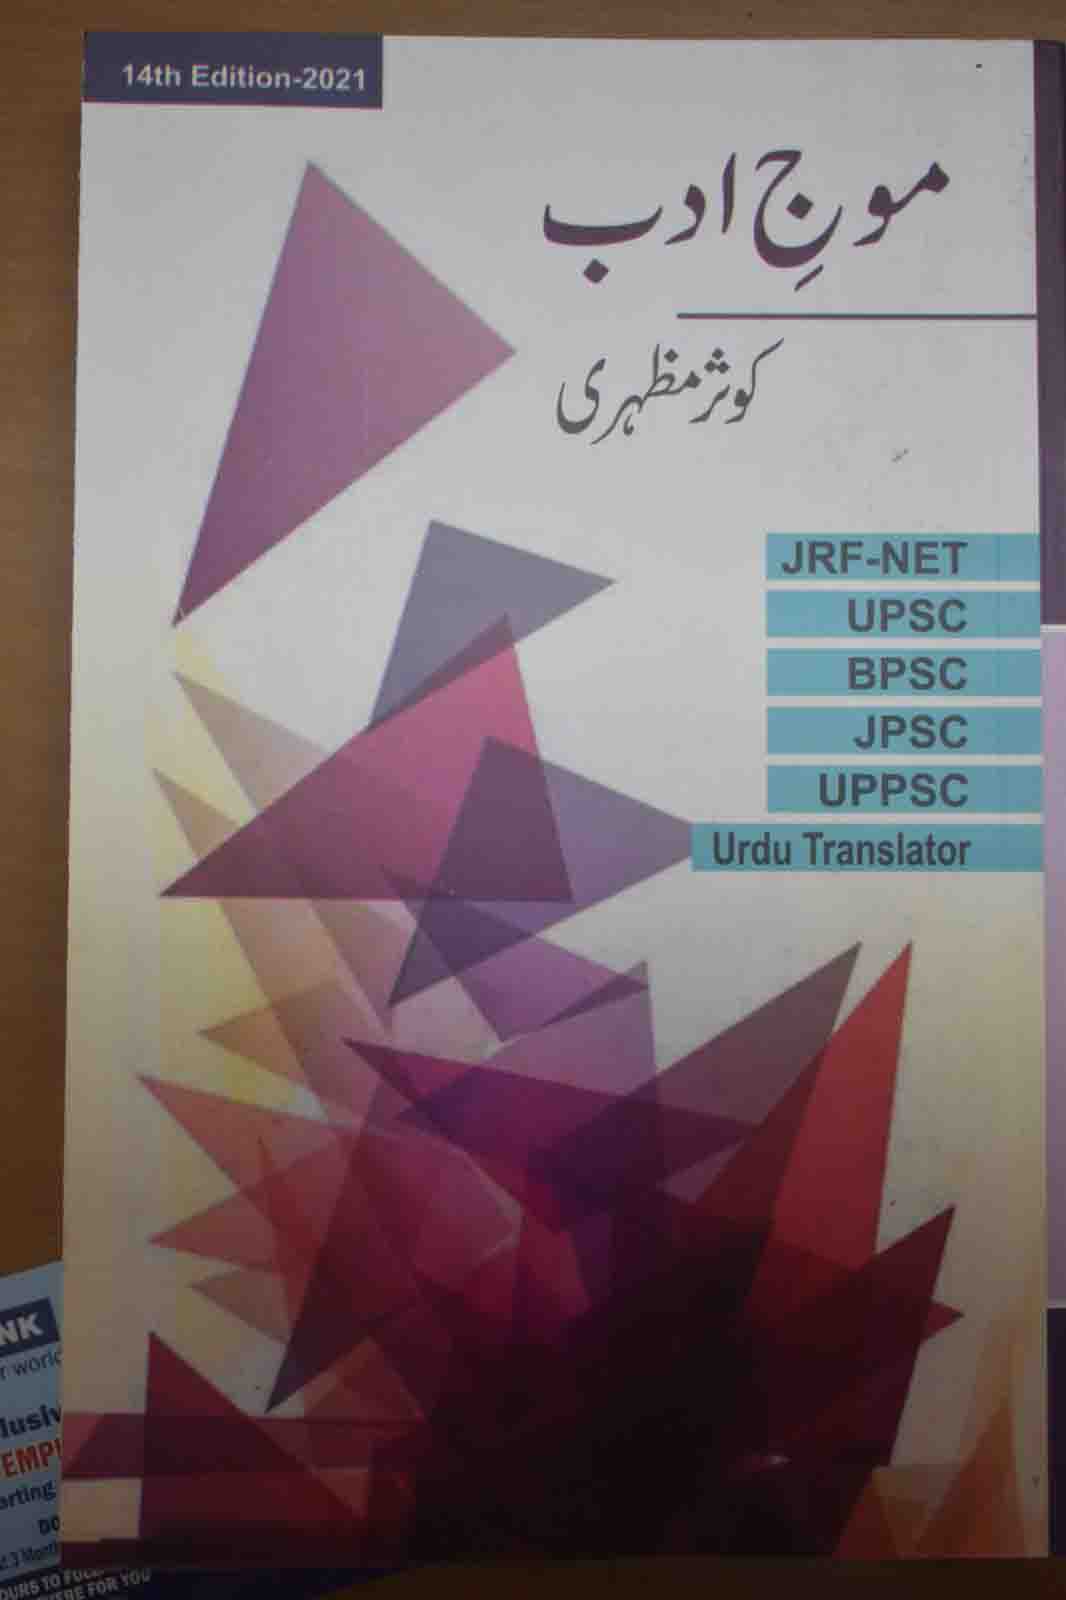 https://www.hindi.awazthevoice.in/upload/news/170290502819_Urdu_literature_came_out_of_walls_and_earned_name,_how_did_Mohammad_Ehsanul_Haq_become_Prof_Kausar_Mazhari_5.jpg